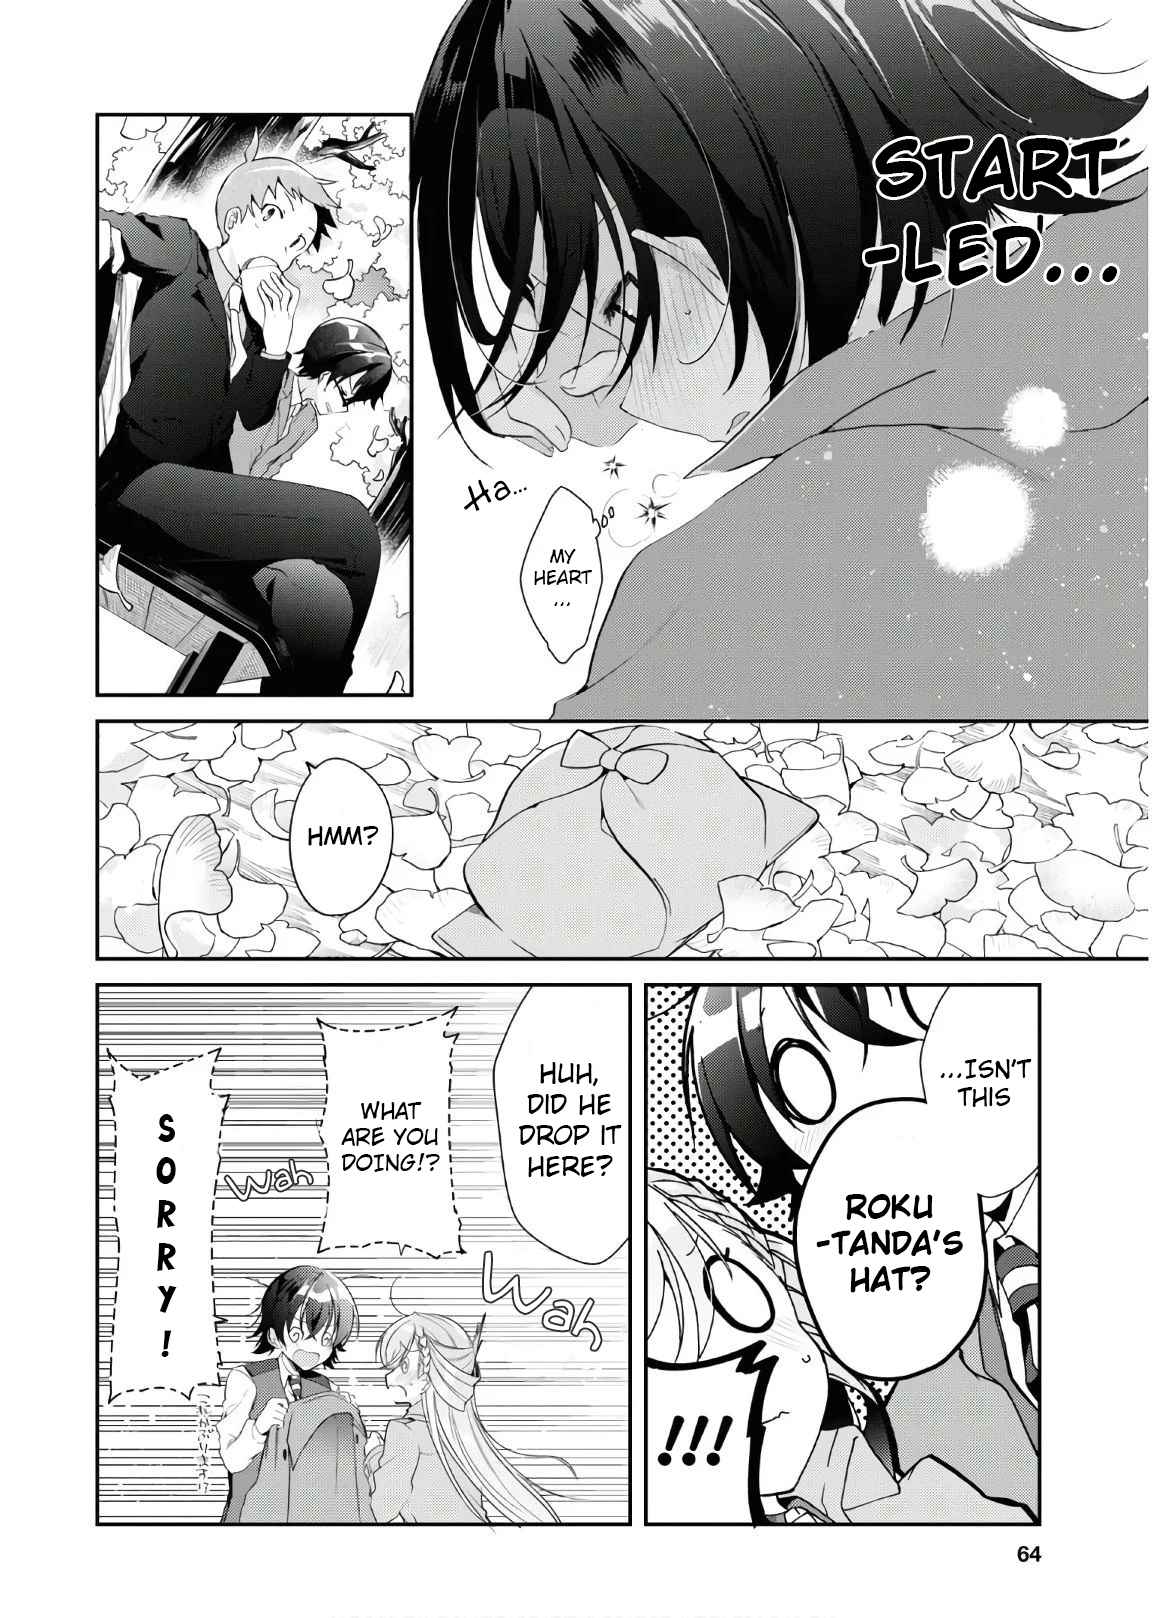 Isshiki-san Wants to Know About Love. - chapter 7 - #6